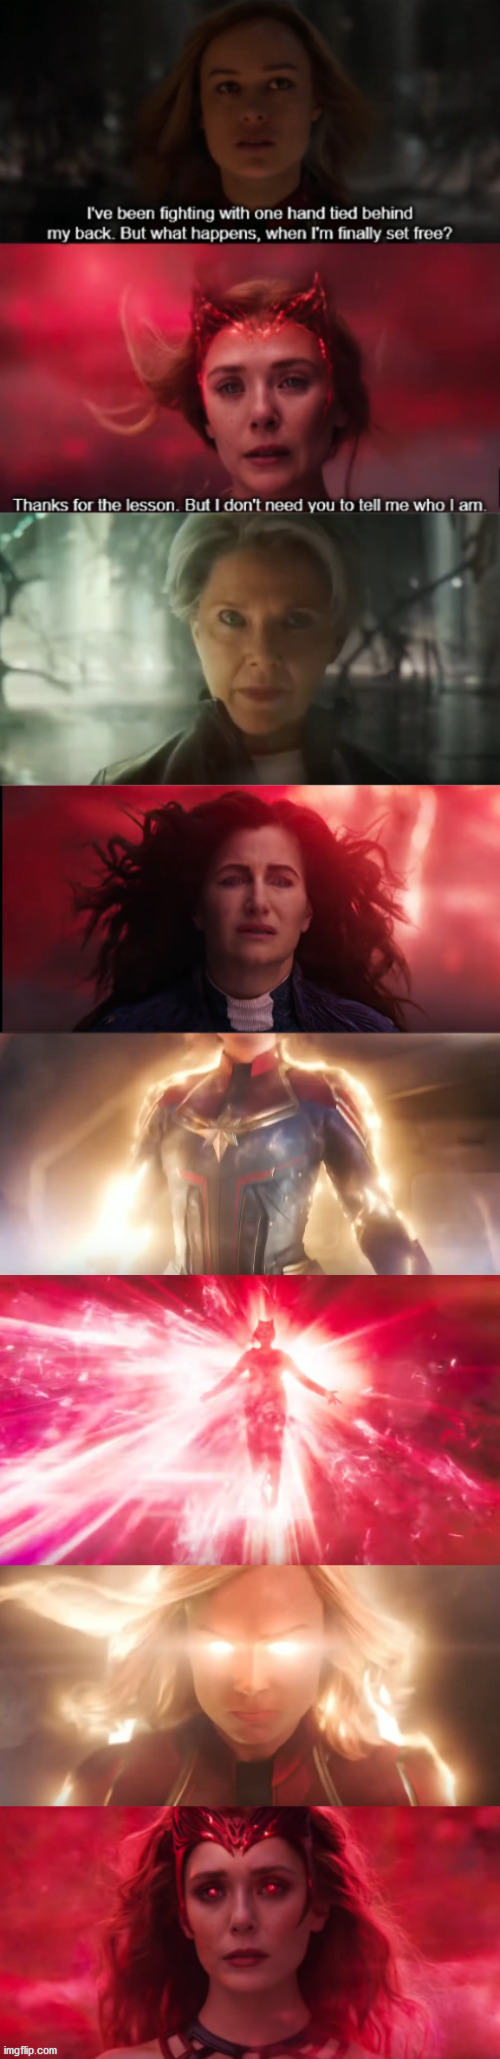 Which powerful female transformation do you think is cooler? (I think Wanda's) | image tagged in captain marvel,wanda,wandavision,marvel,mcu,comparison | made w/ Imgflip meme maker